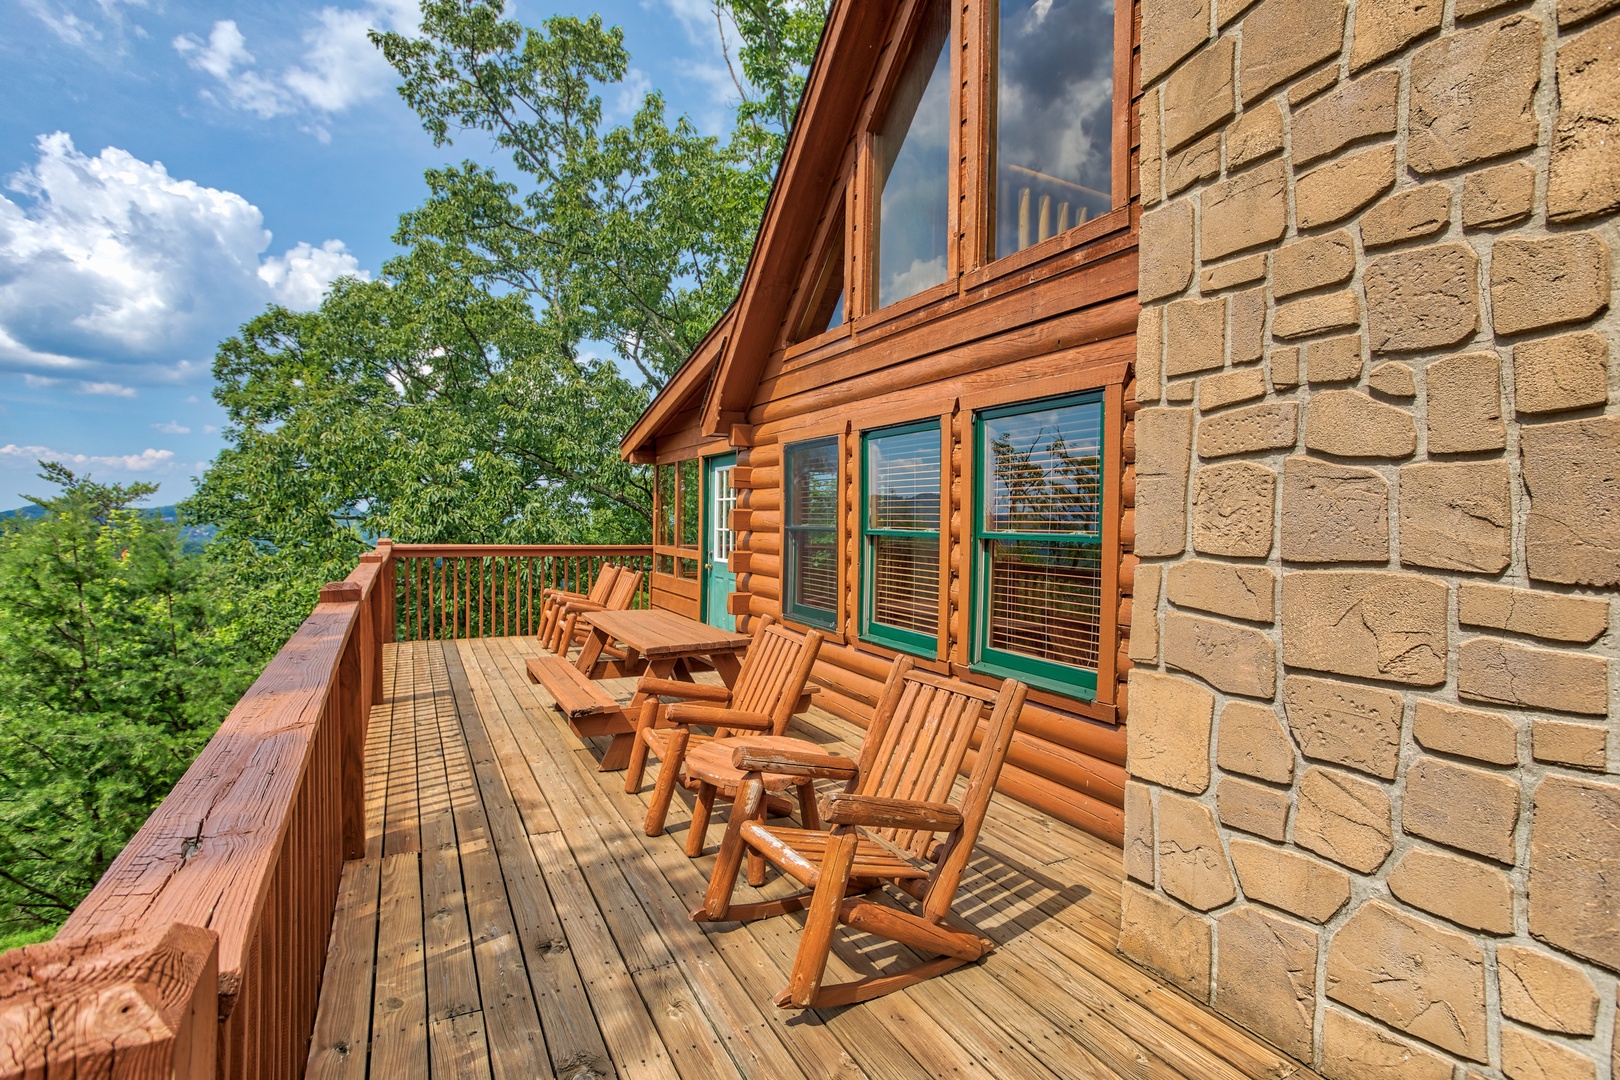 Adirondack chairs, picnic table, and rocking chairs on the deck at Cabin in the Clouds, a 3-bedroom cabin rental located in Pigeon Forge